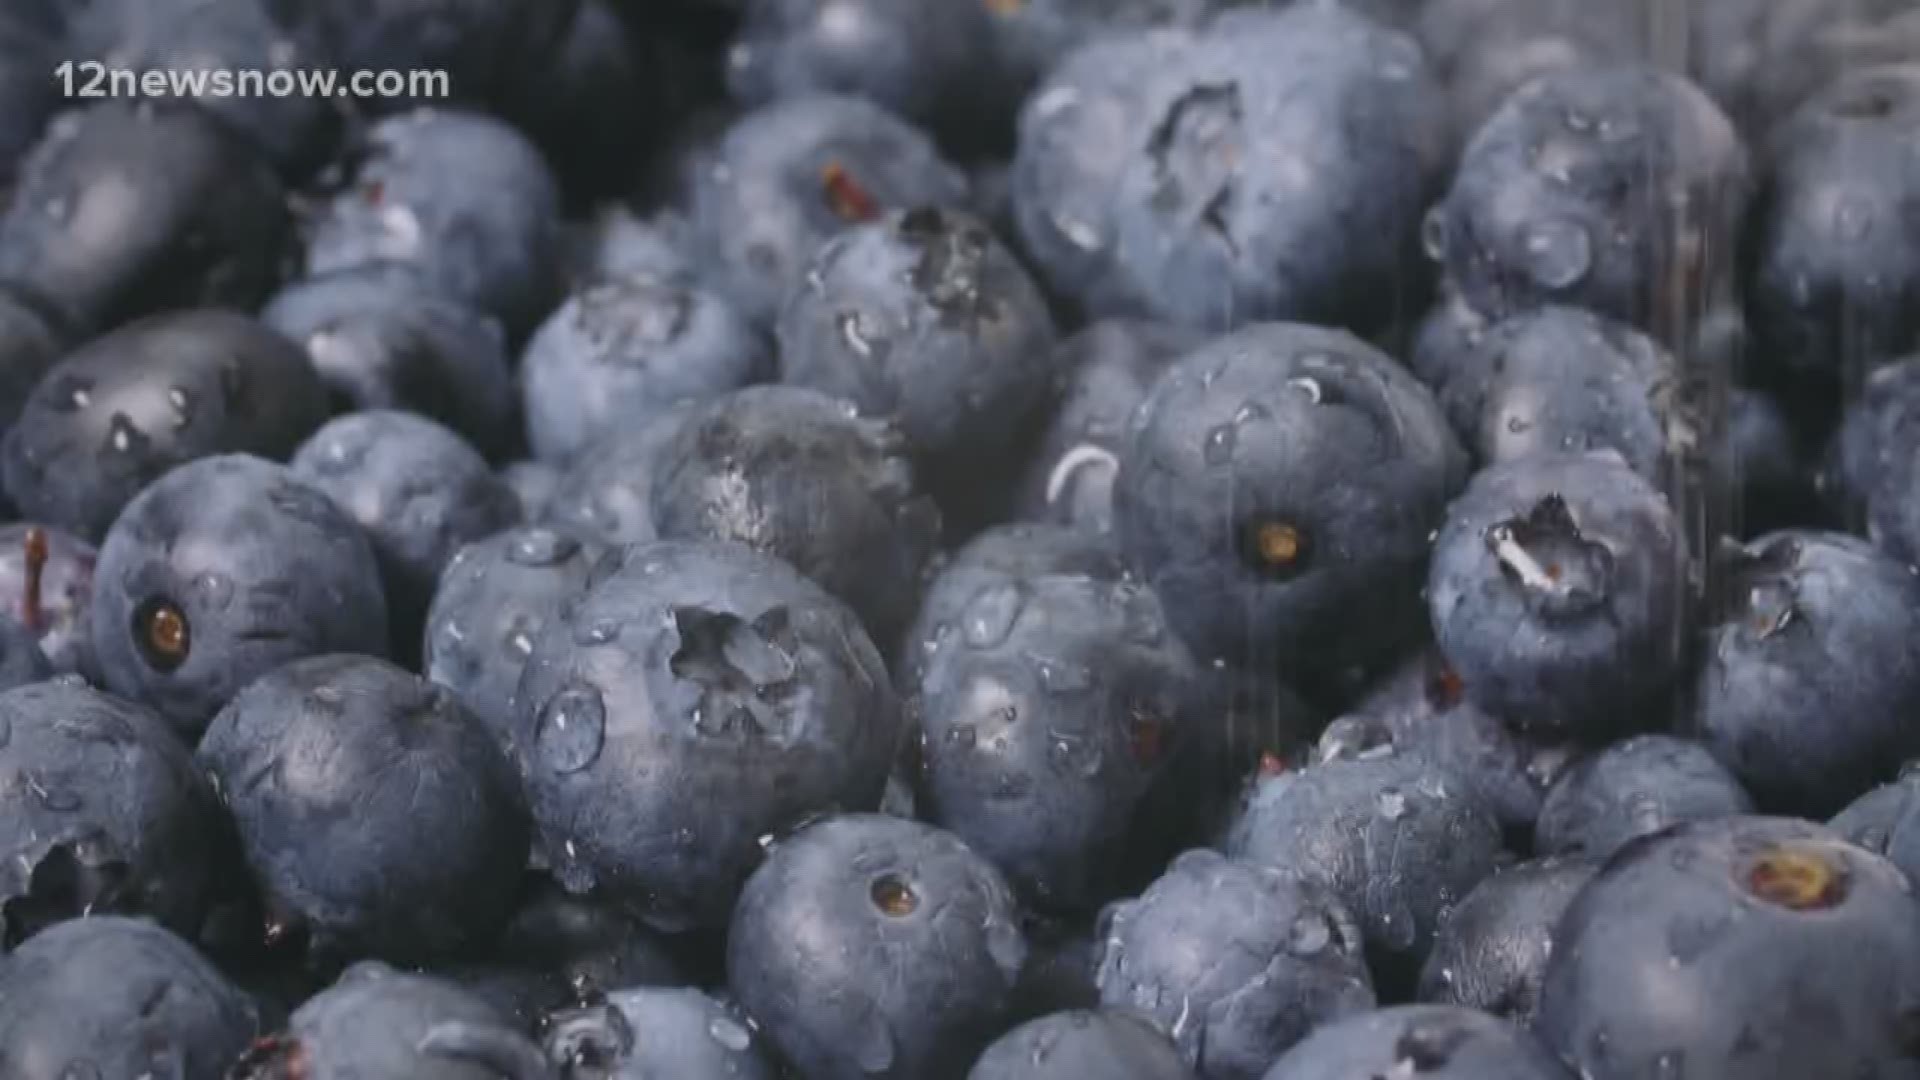 A video viewed millions of times instructed shoppers to wash fruit with soap and water